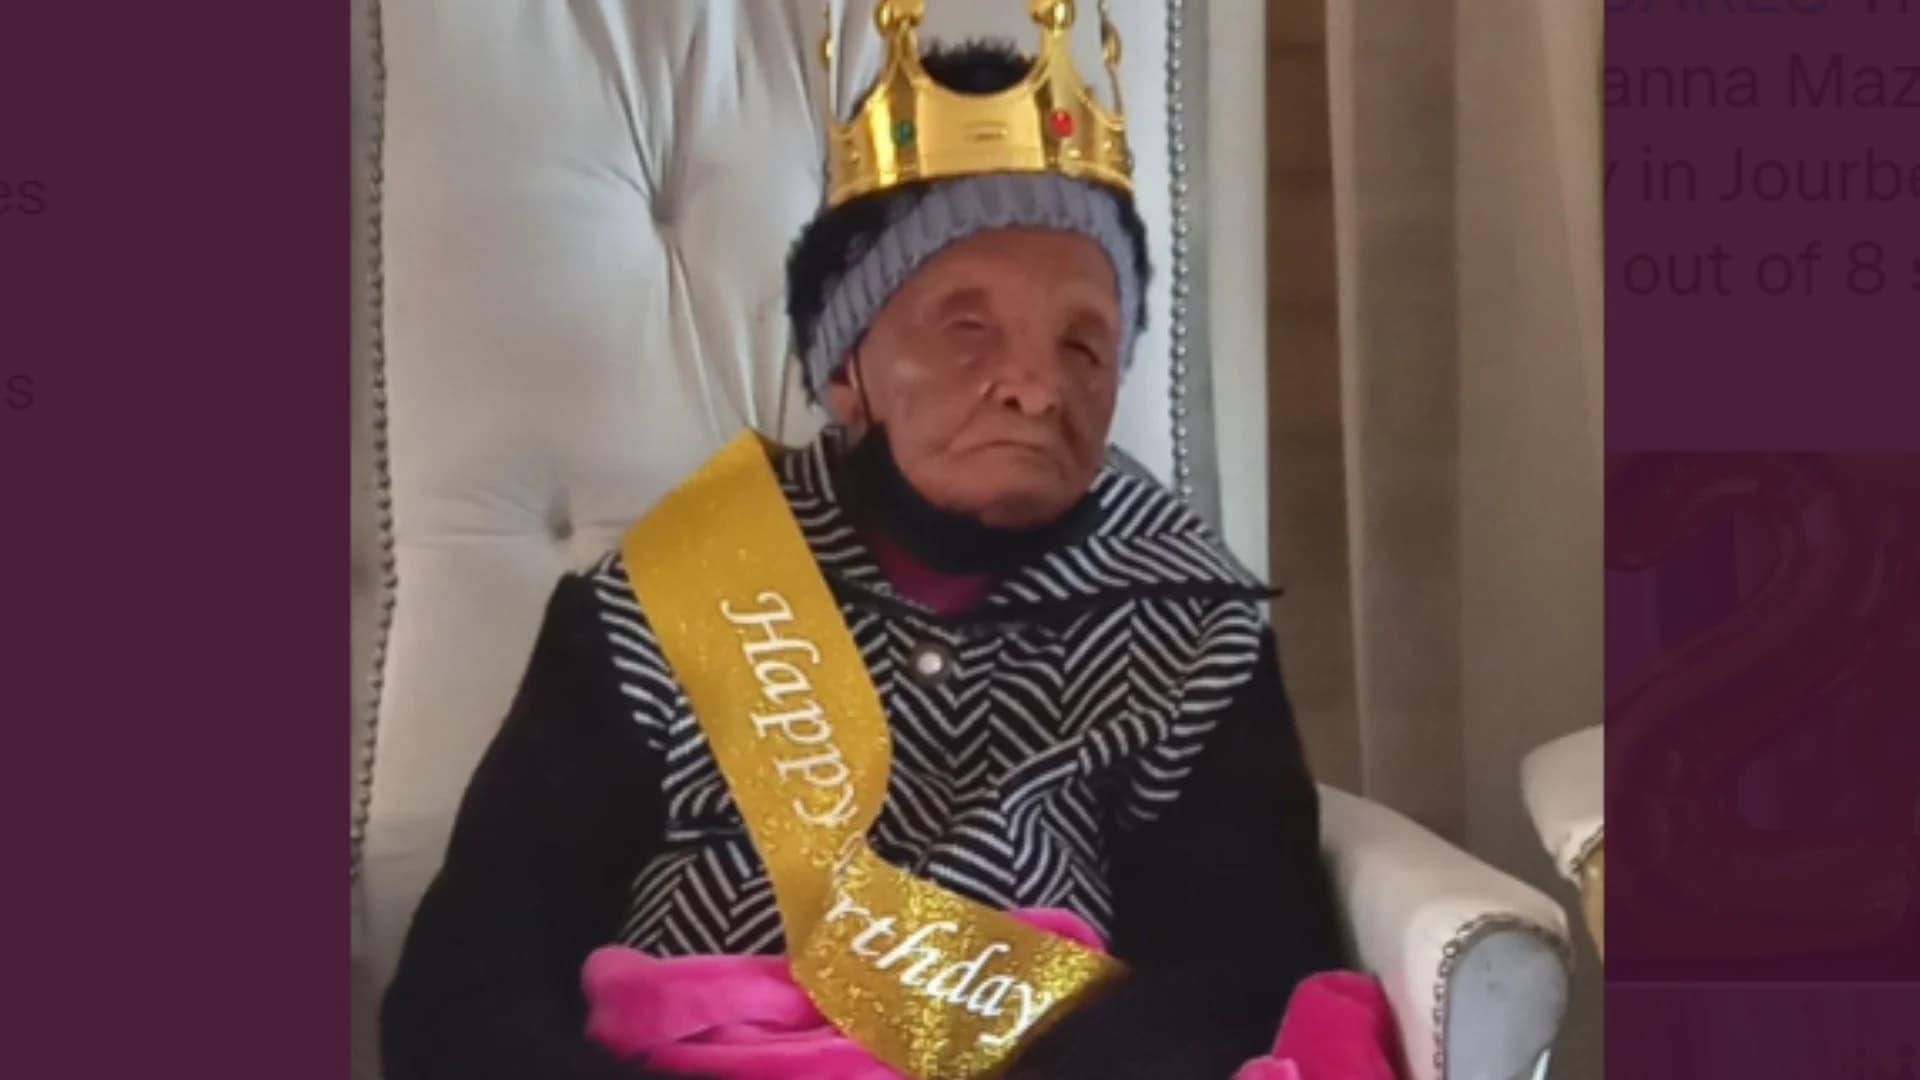 What’s Hot: ‘World’s oldest woman’ celebrates 128th birthday